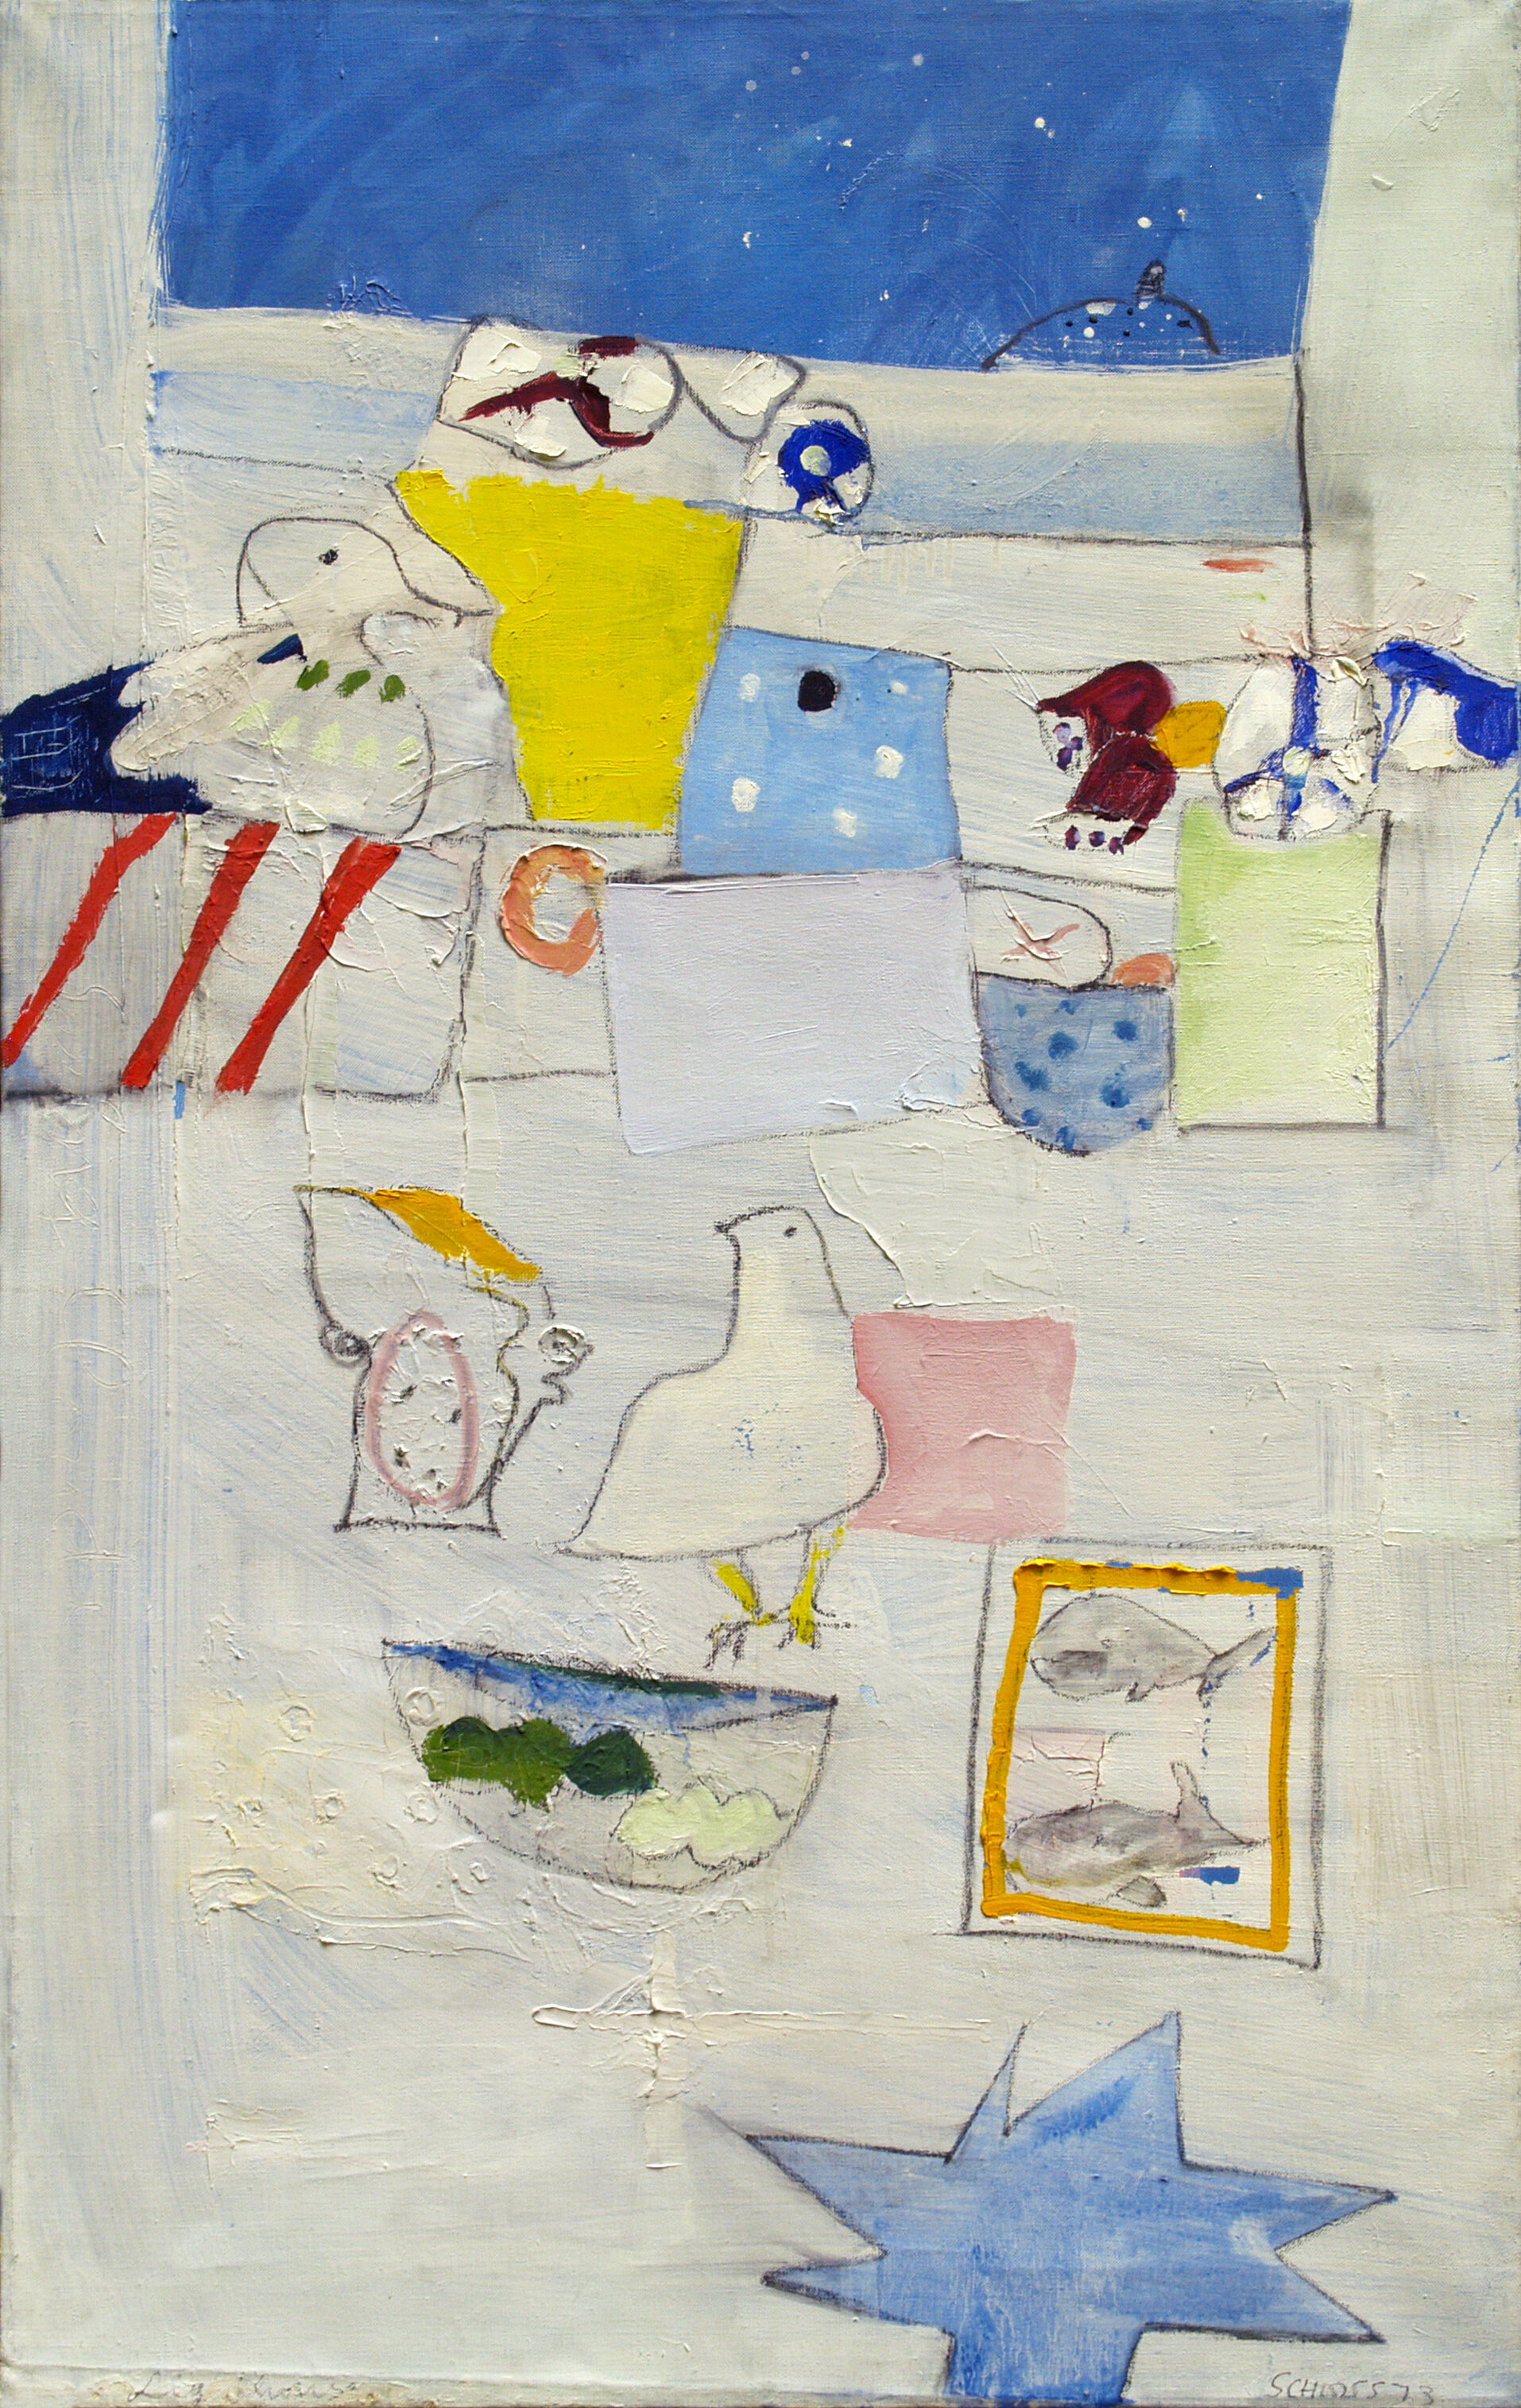 Abstract blue and white interior with two birds, a light green vase with flowers, several bowls, and a rectangle with two whales